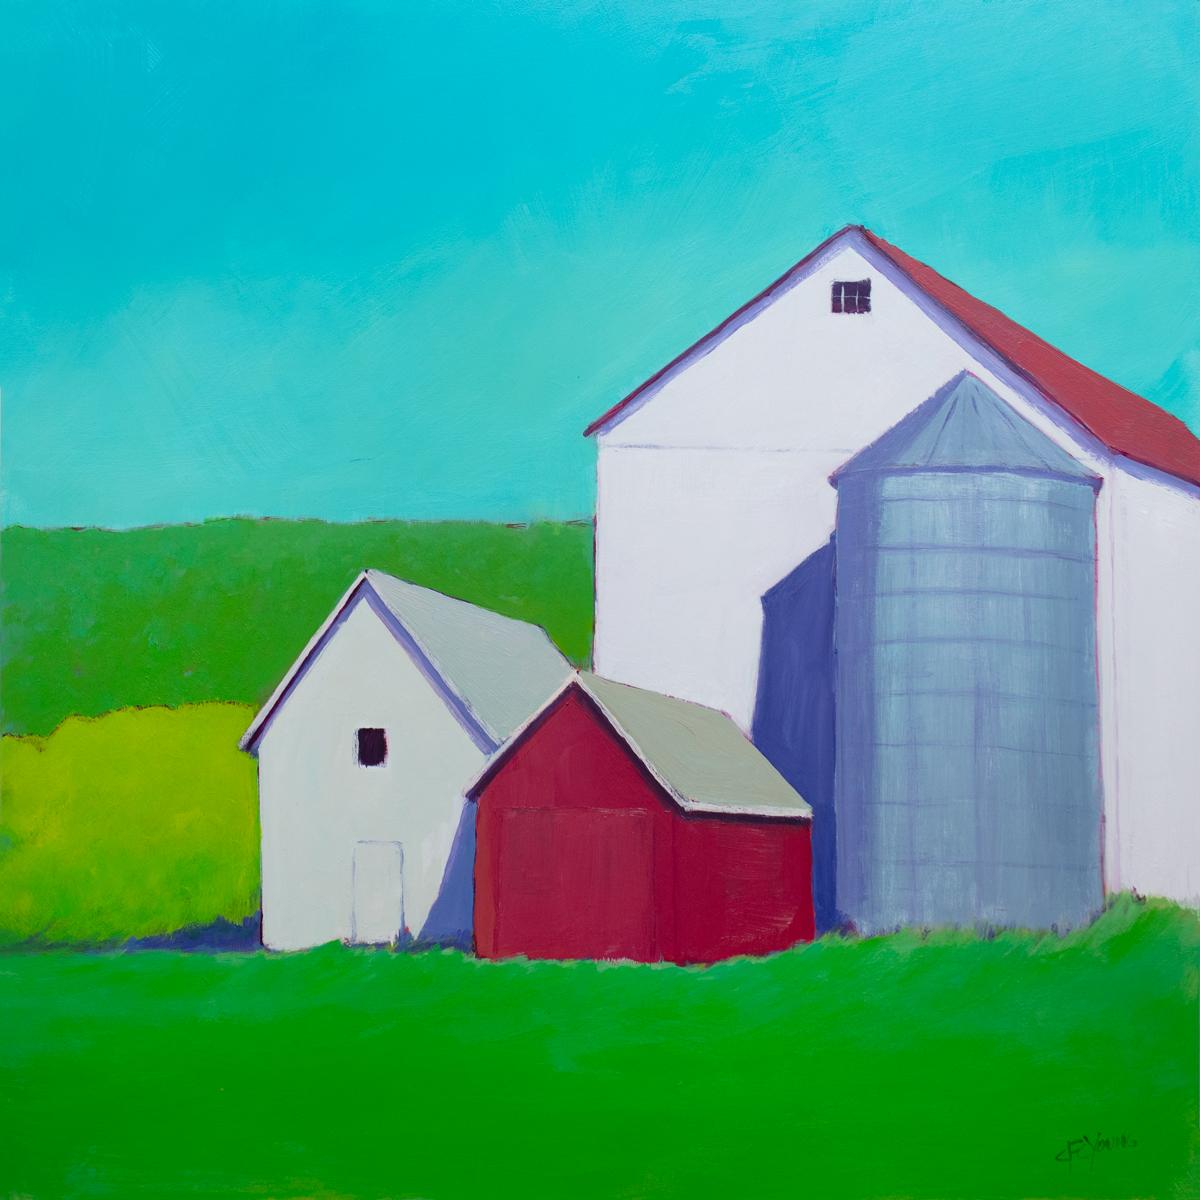 This colorful contemporary landscape painting by Carol Young features a vibrant palette and captures three white and red barns surrounded by greenery under a turquoise blue sky. The barns cast stark, cool purple shadows while the green foliage and